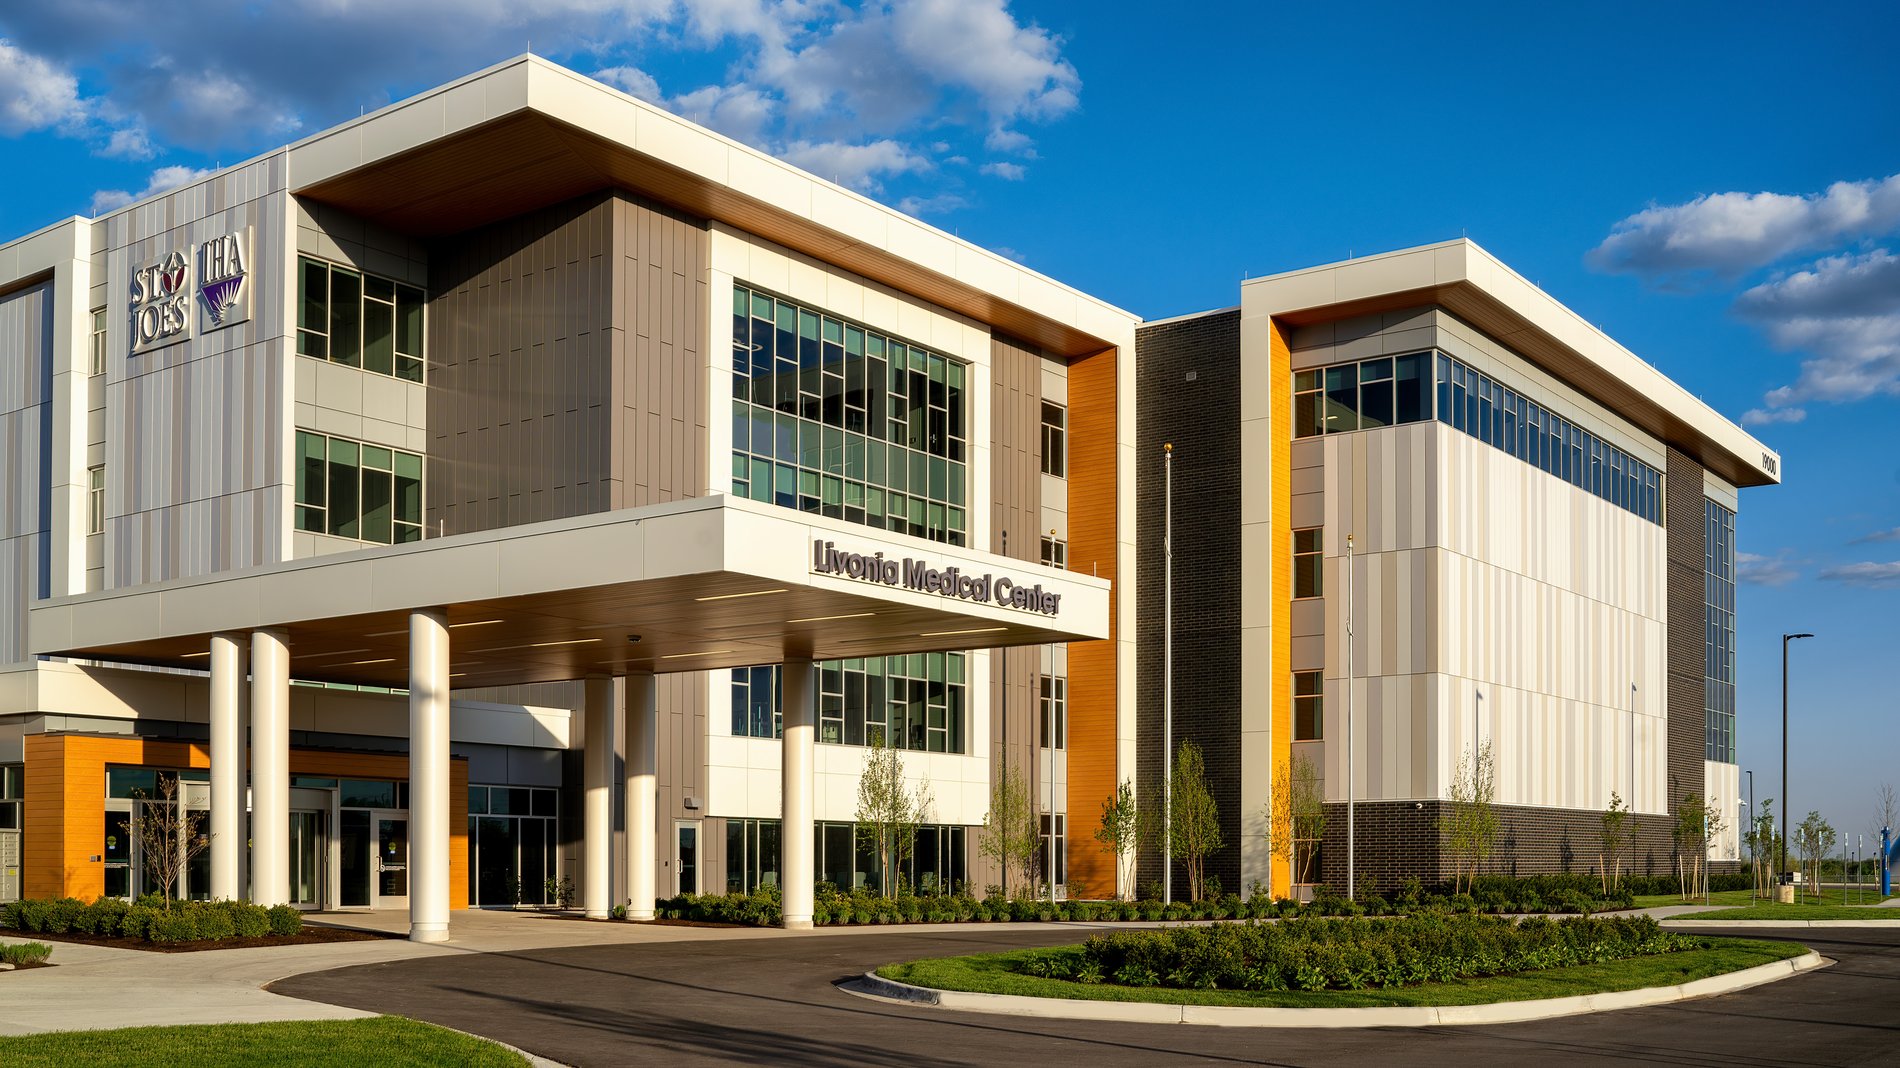 Trinity Health IHA Medical Group, Orthopaedics - Schoolcraft Campus is located in the Livonia Medical Center.